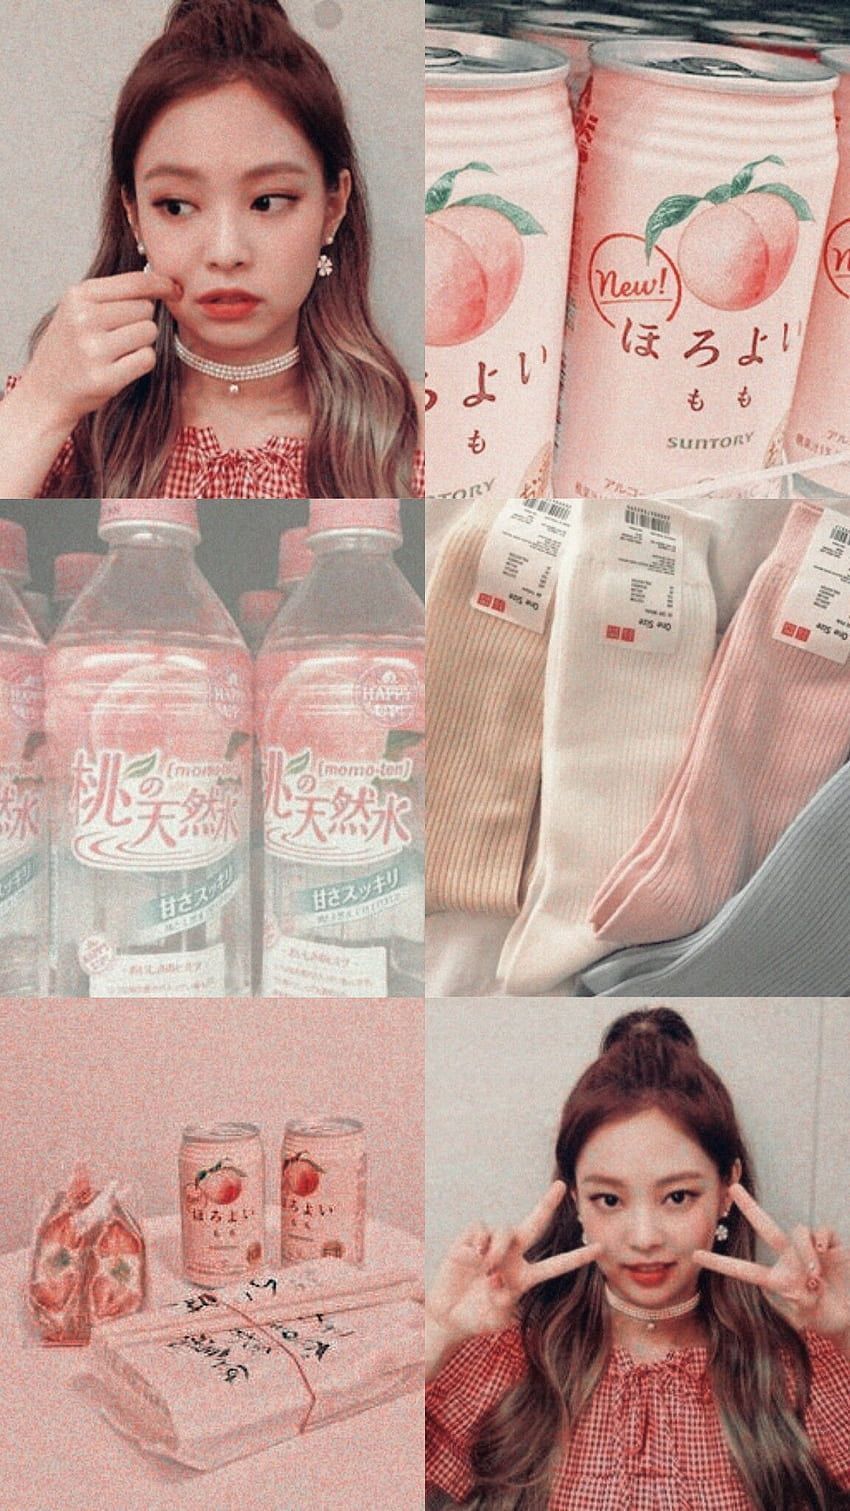 A collage of images featuring a girl with brown hair, pink drinks, socks, and a shirt. - Jennie